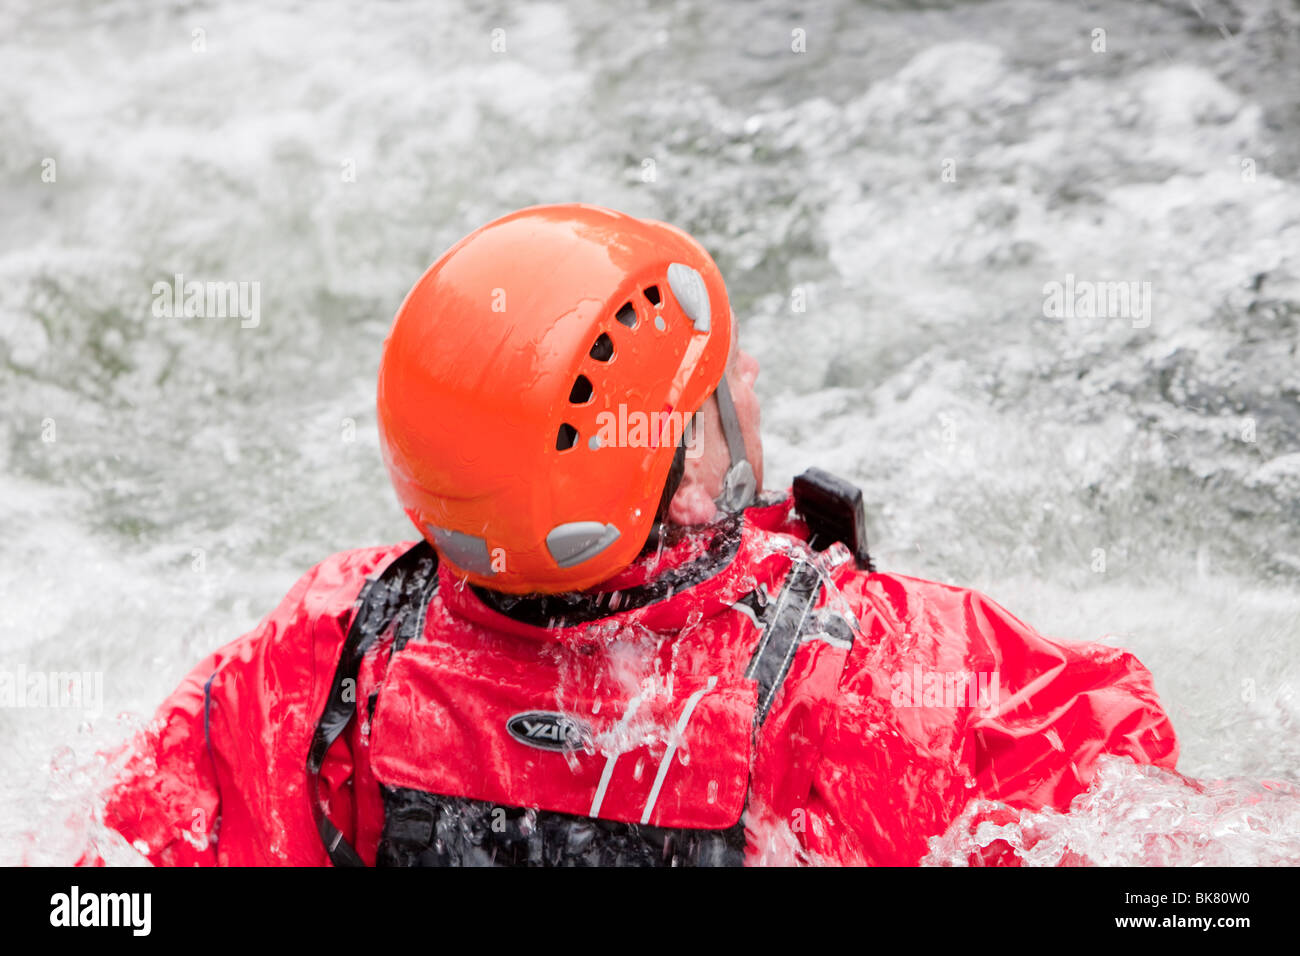 Members of the Langdale/Ambleside Mountain Rescue Team train in Swift water rescue techniques on the River Brathay Stock Photo